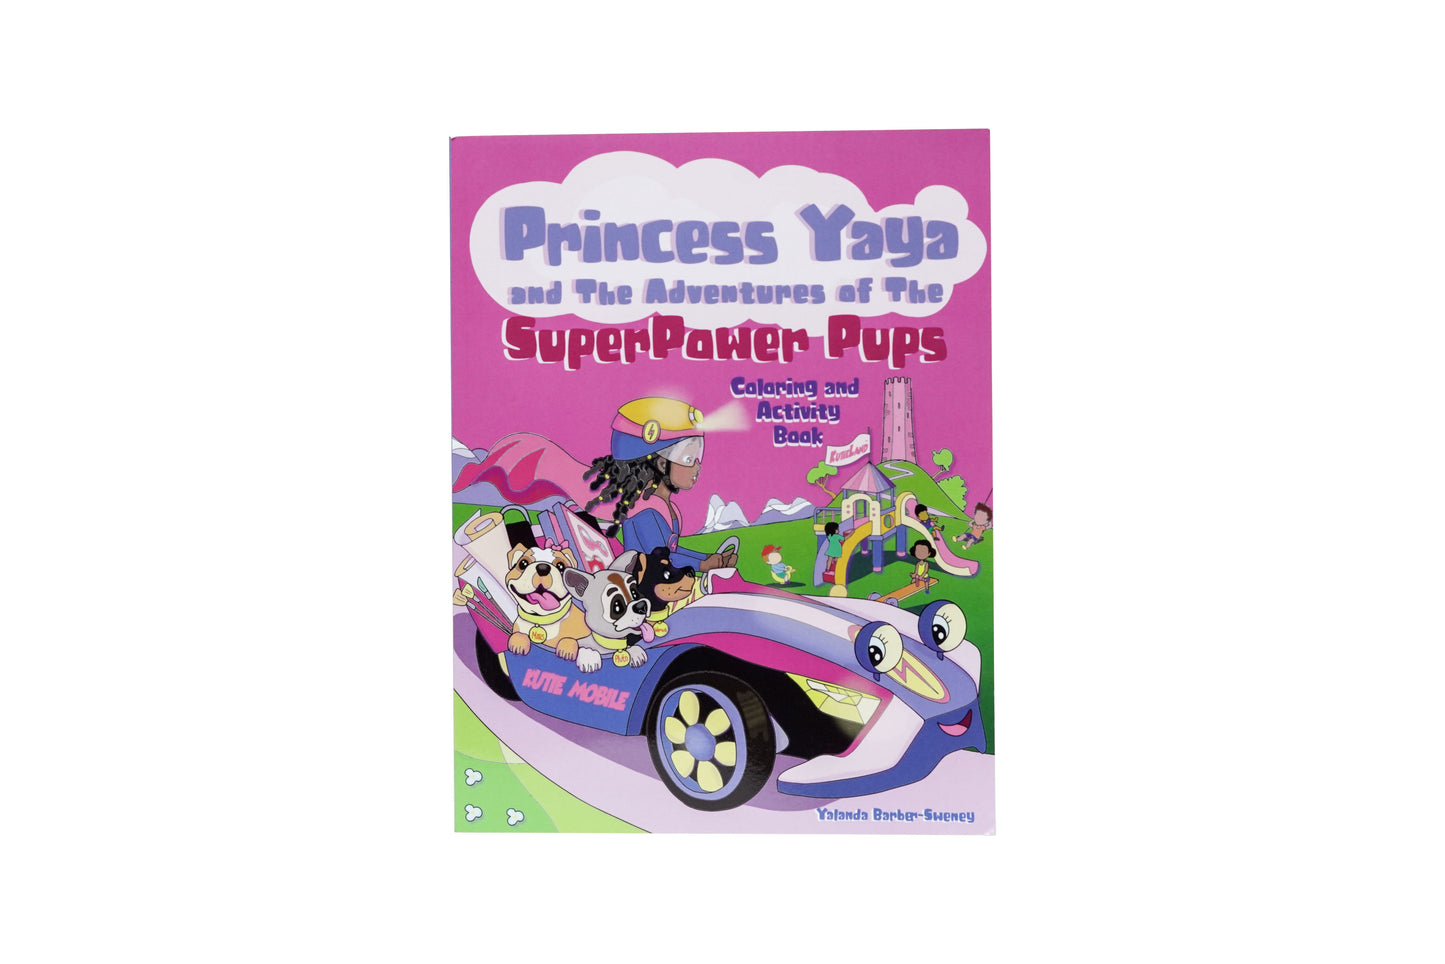 Princess Yaya and The Adventures of the SuperPower Pups: Coloring and Activity Book on Anger